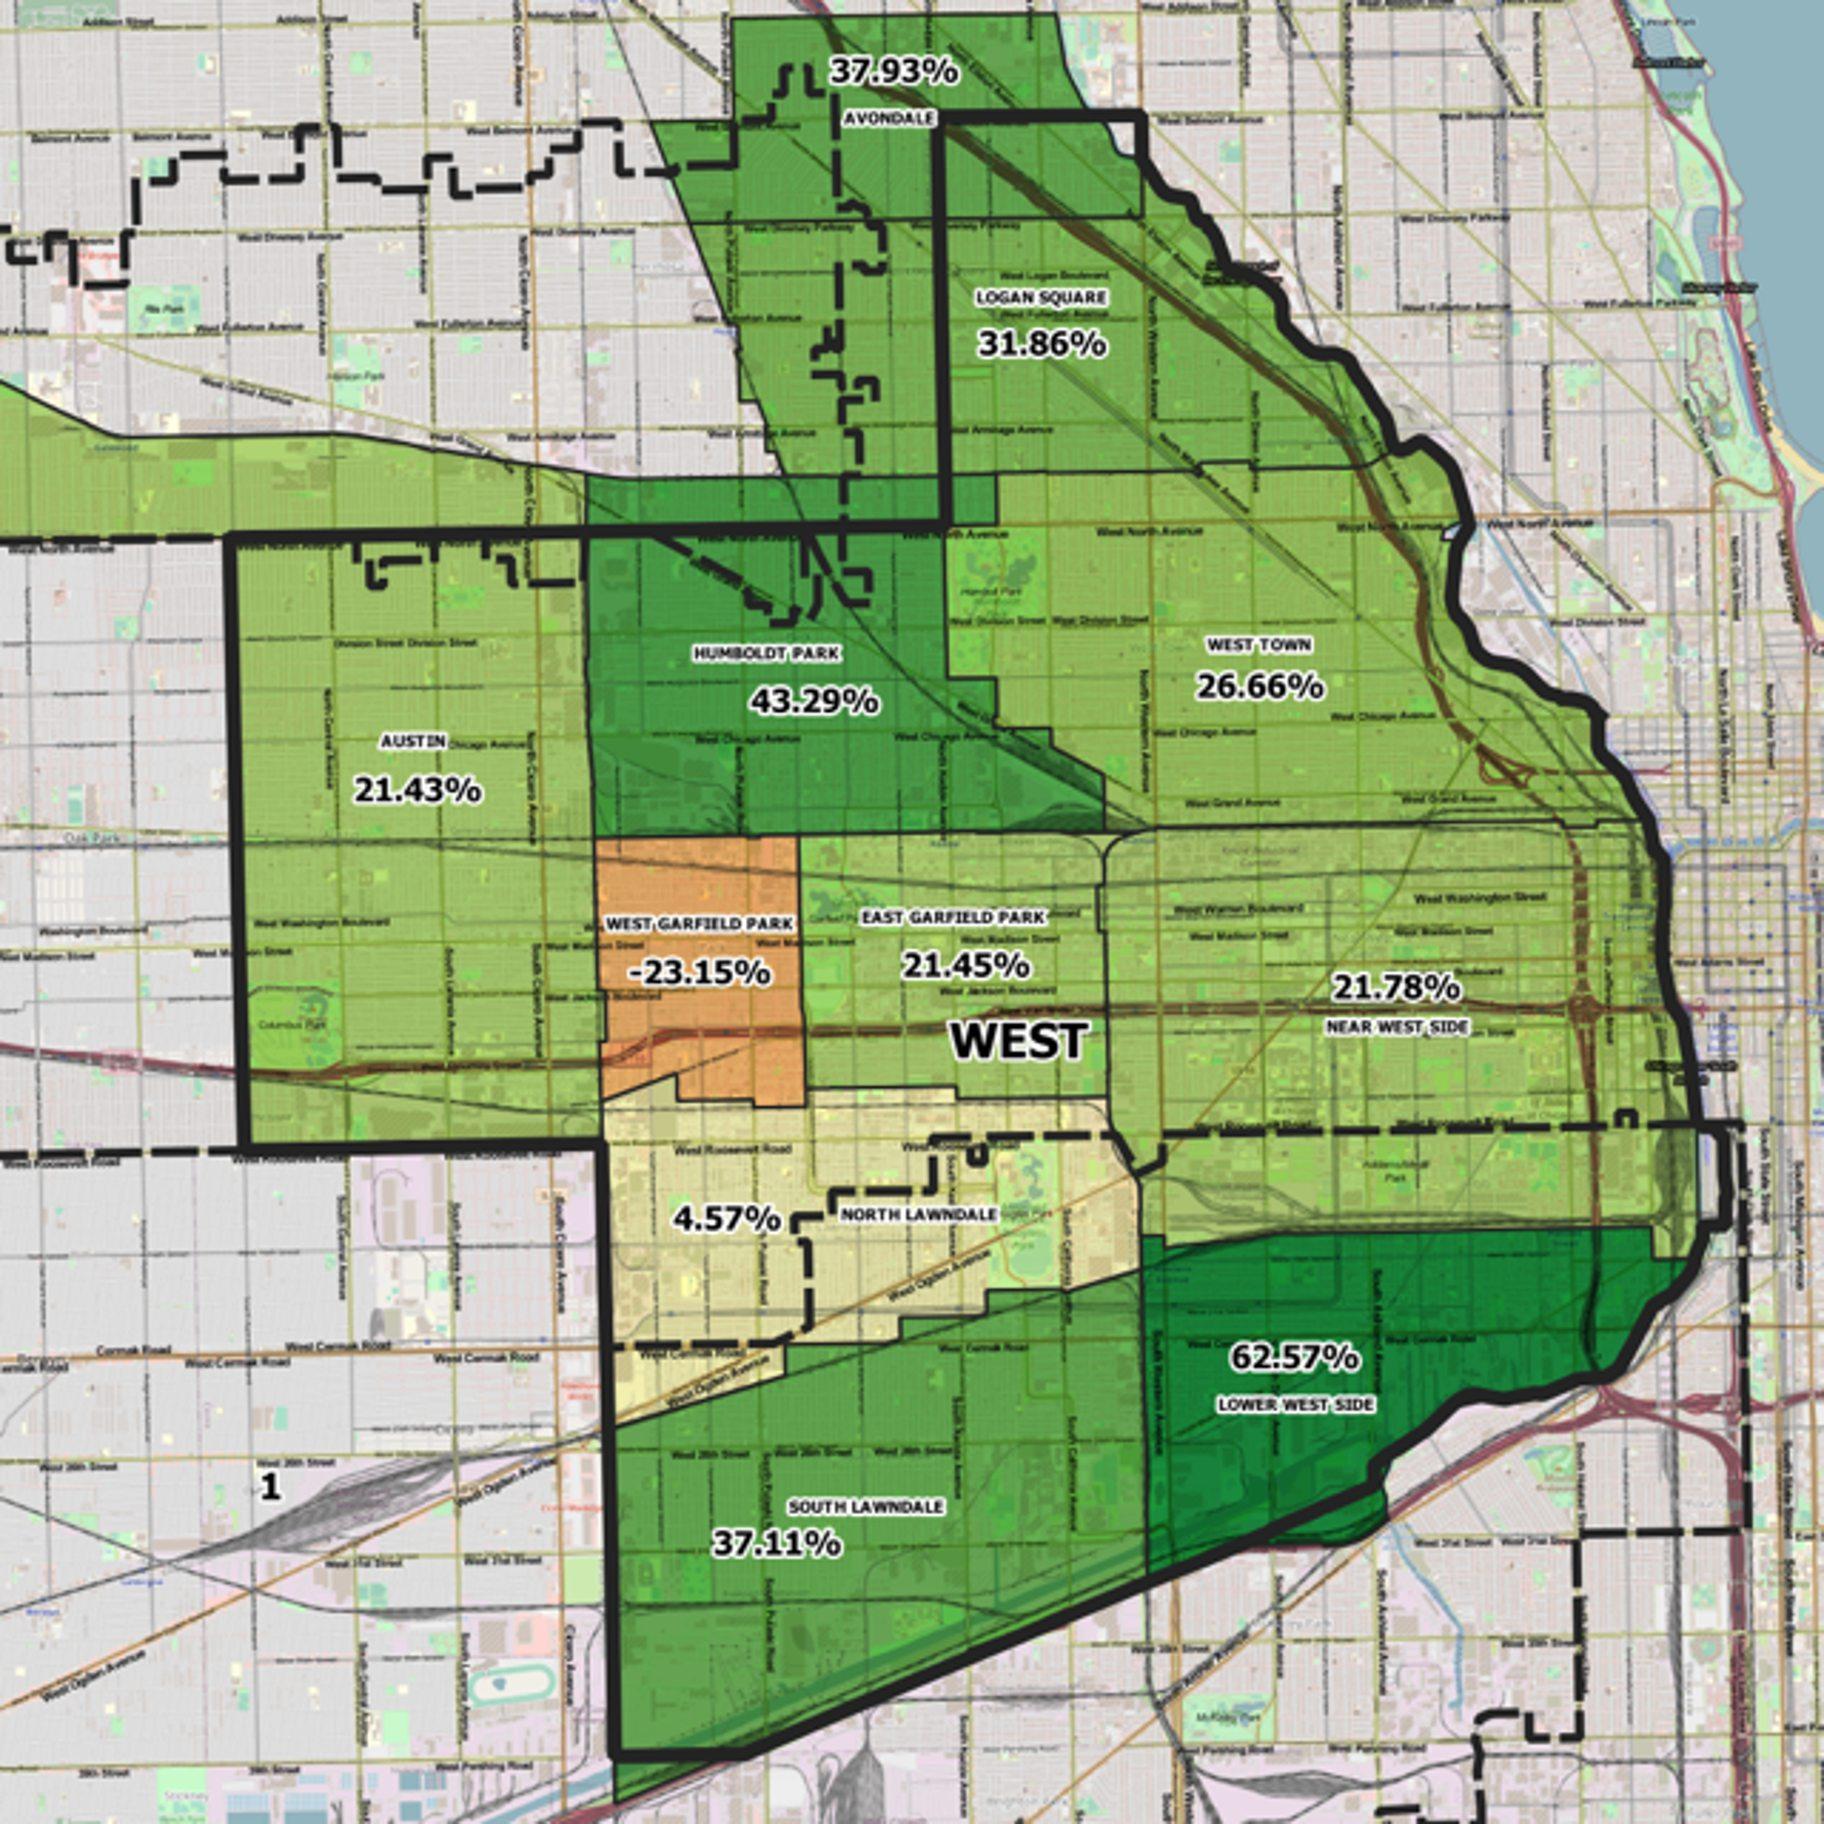 Data from the Cook County Board of Review shows a nearly 63% property tax increase in the Lower West Side community area, which includes the Pilsen neighborhood.